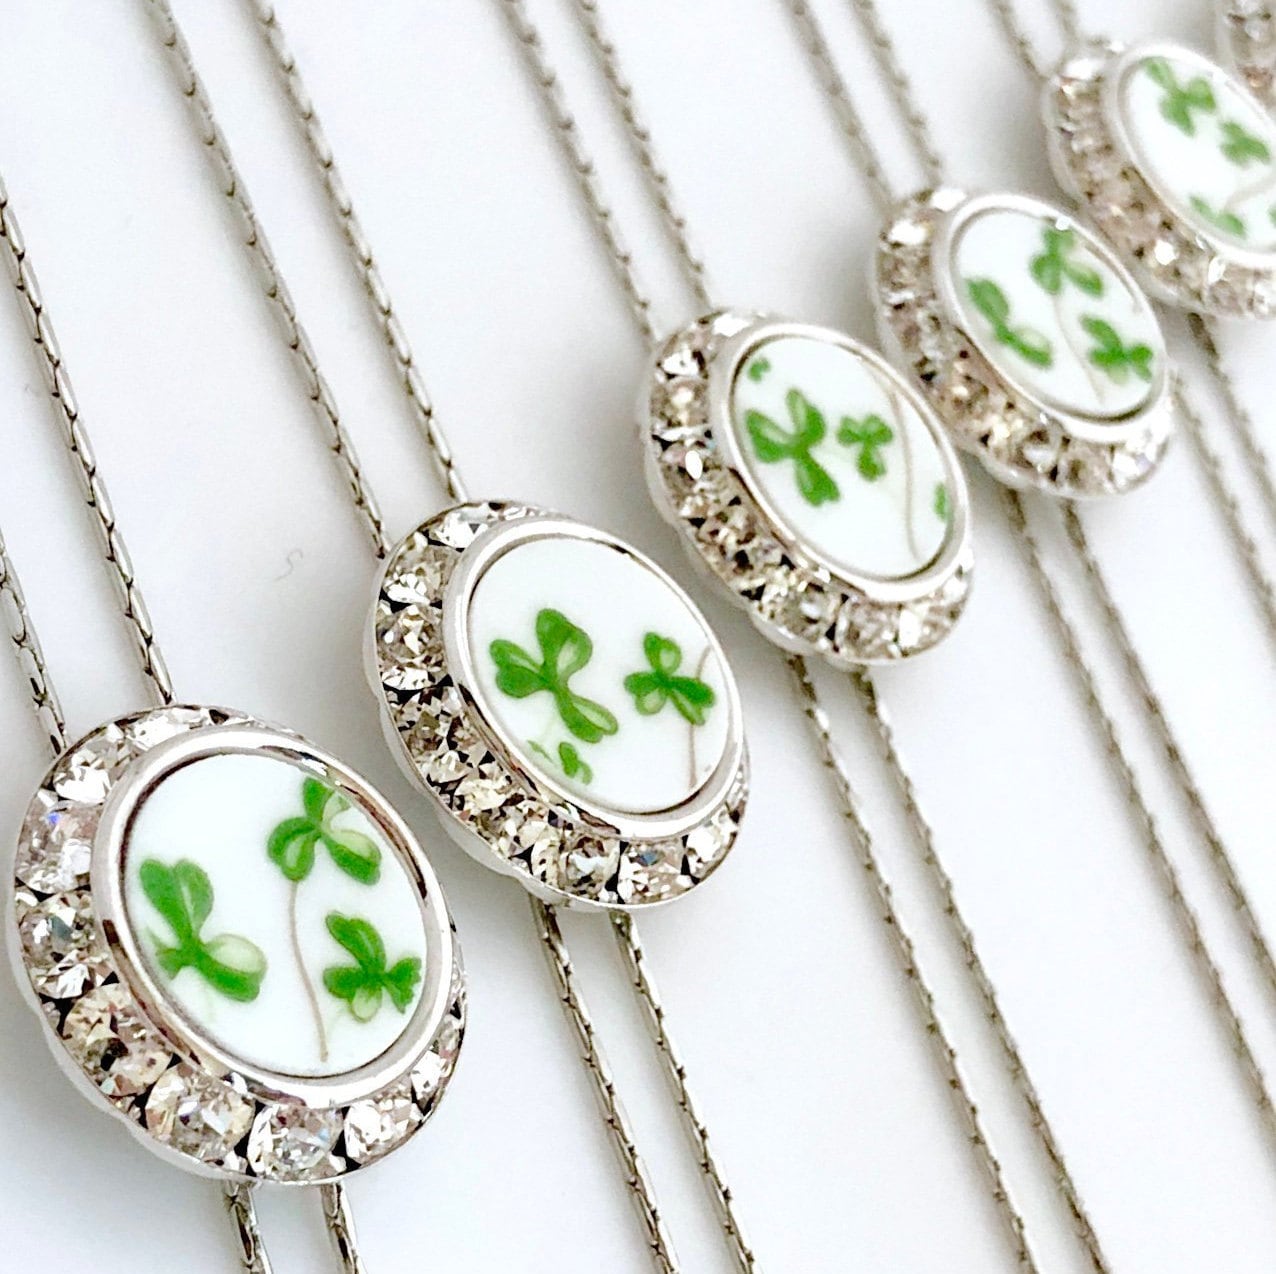 Royal Tara Irish China Necklace, Adjustable Bolo Tie, Crystal Broken China Jewelry, Unique Celtic Gifts for Women, Gifts for Women